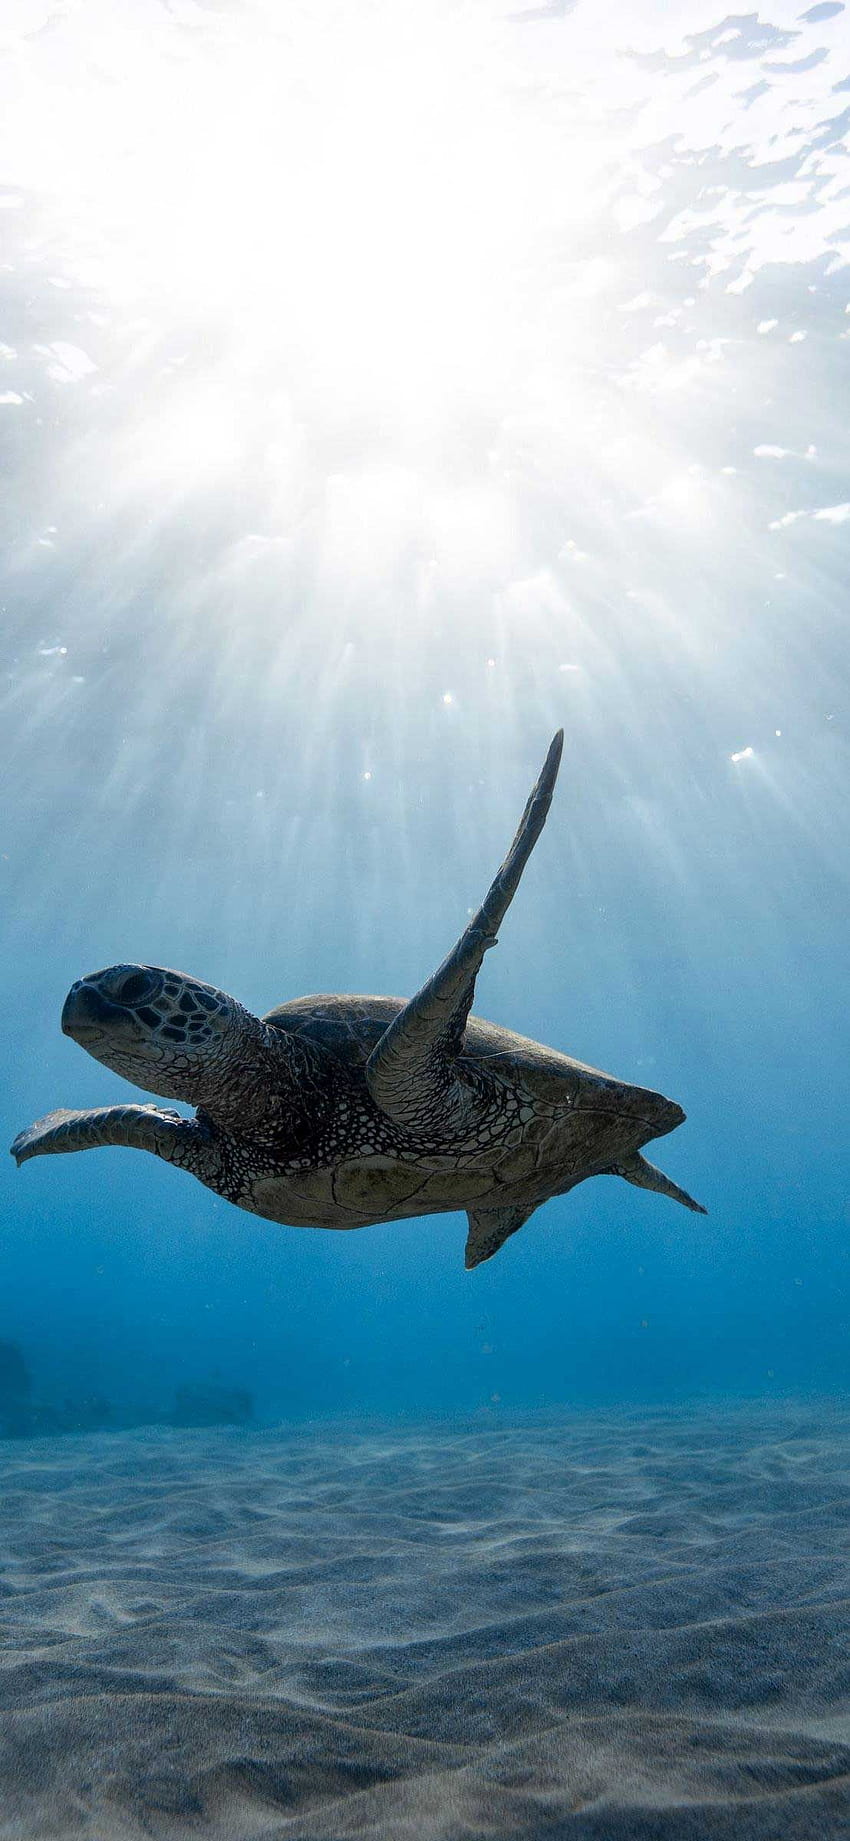 A turtle swimming in the ocean - Underwater